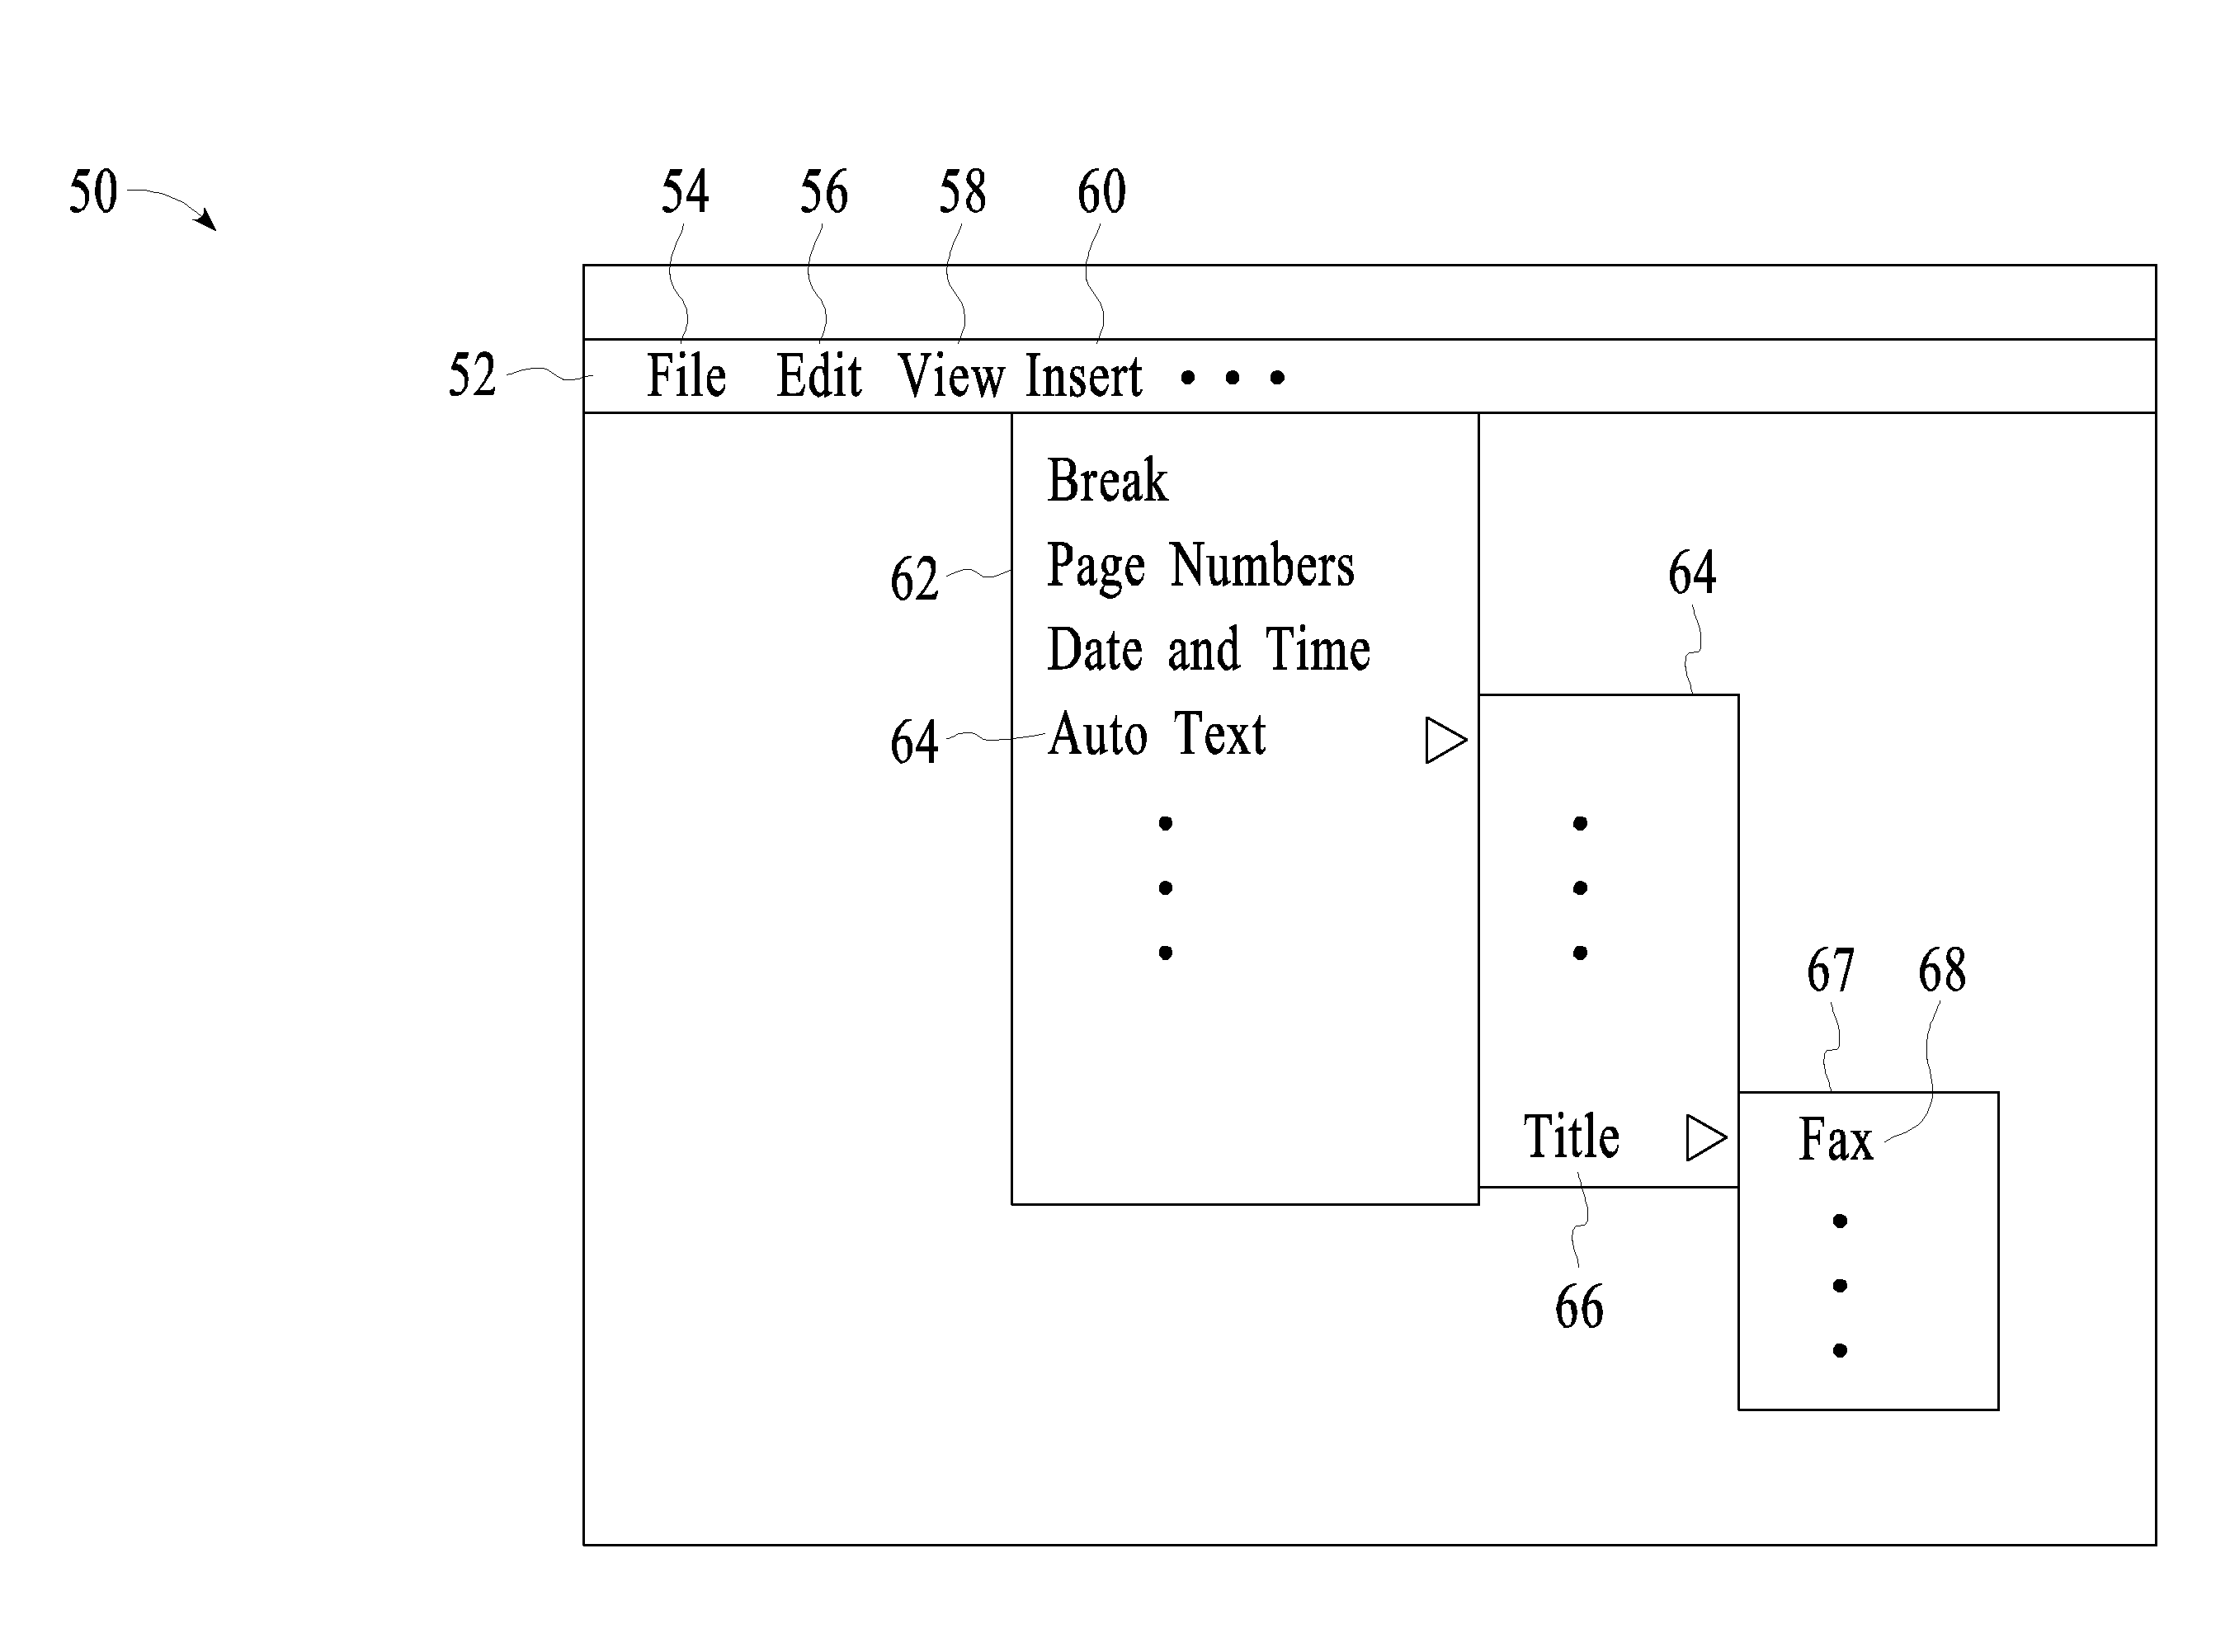 System for consolidated associated buttons into easily accessible groups